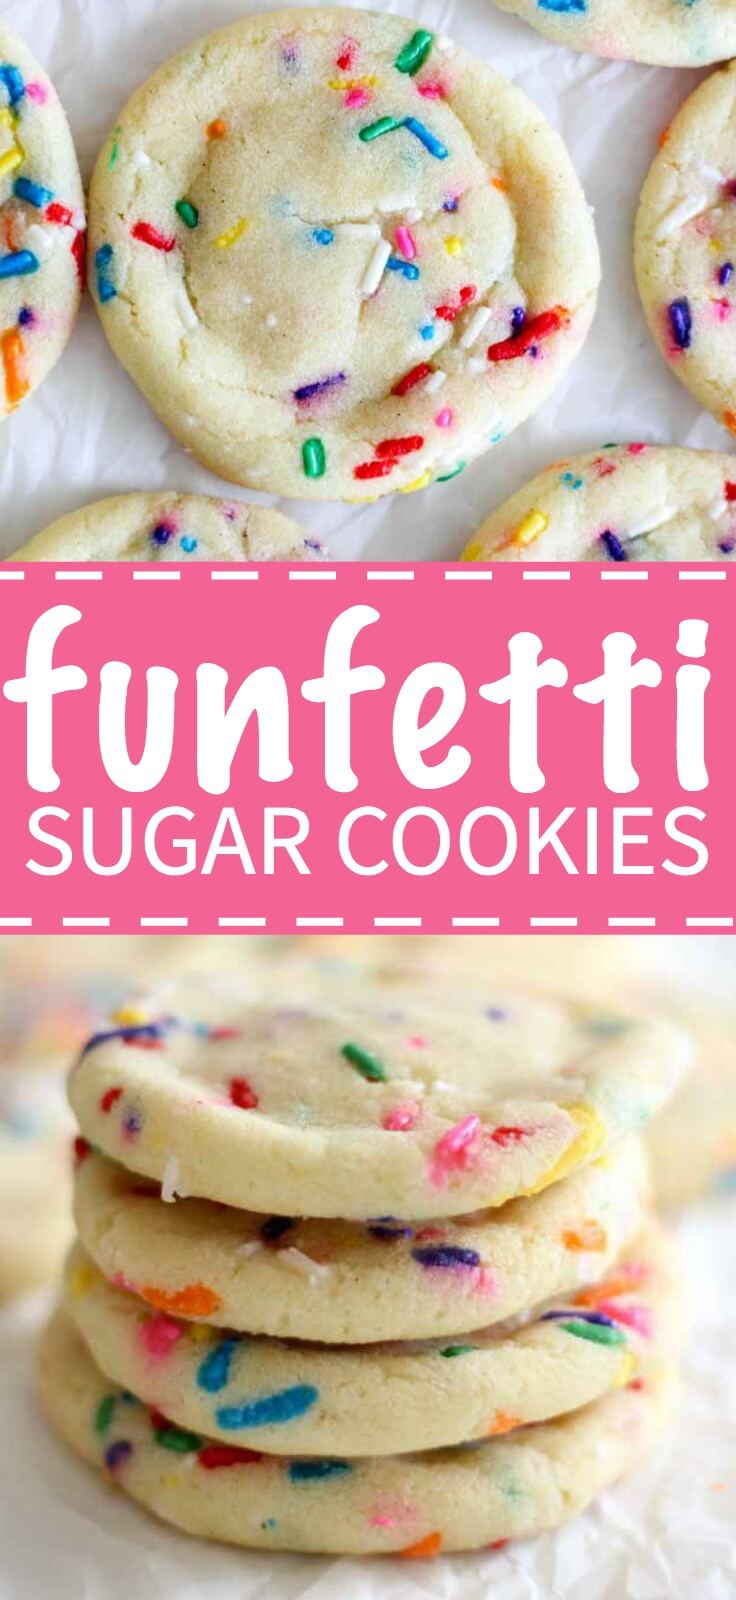 Sprinkles make everything (and life) better. These funfetti sugar cookies are a sprinkle dream come true. They taste just like your favorite Funfetti cake mix in cookie form.